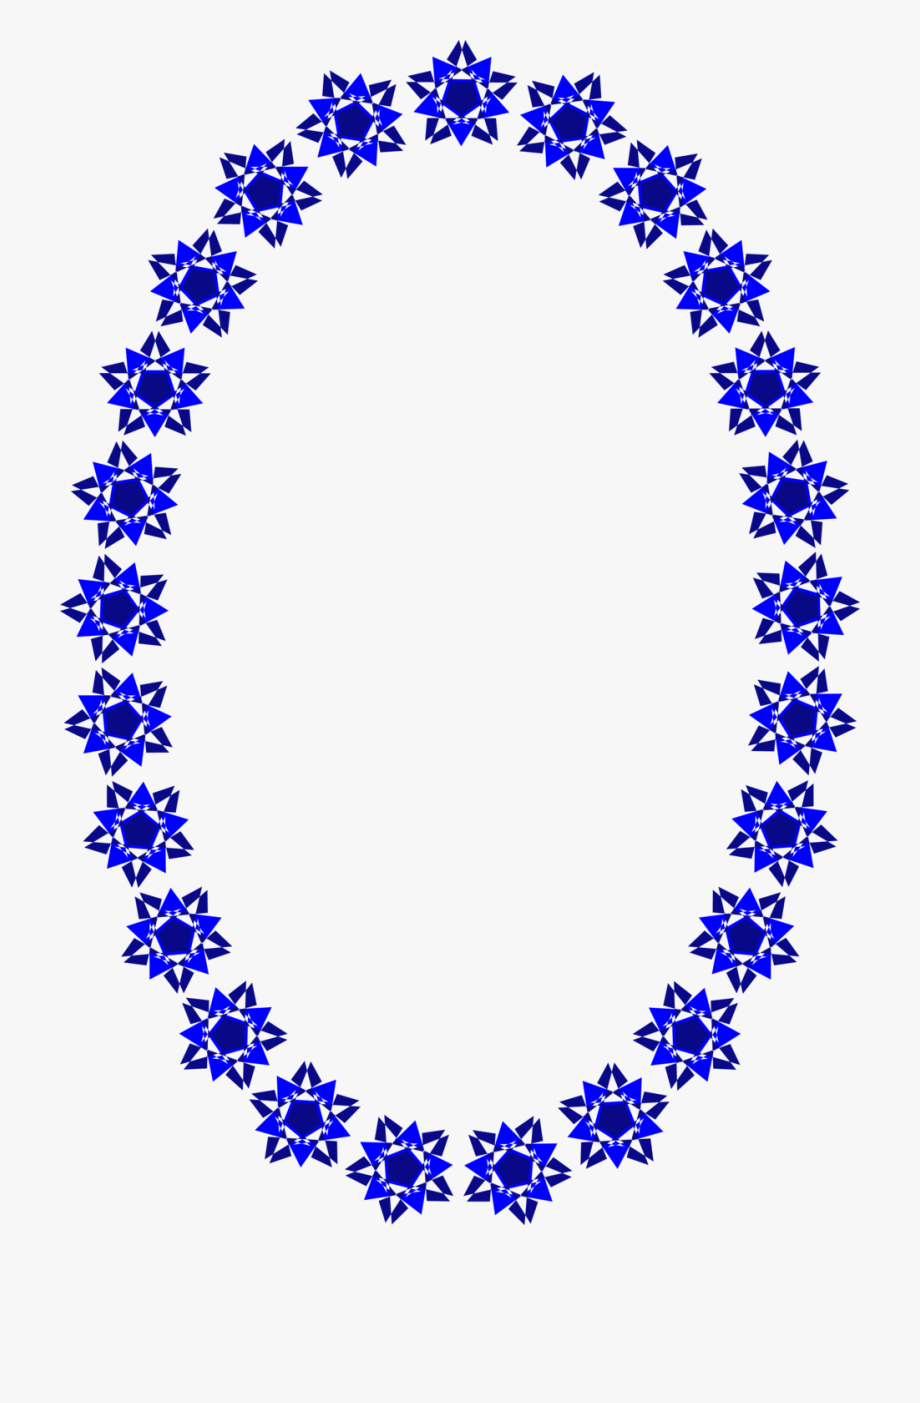 oval clipart borders